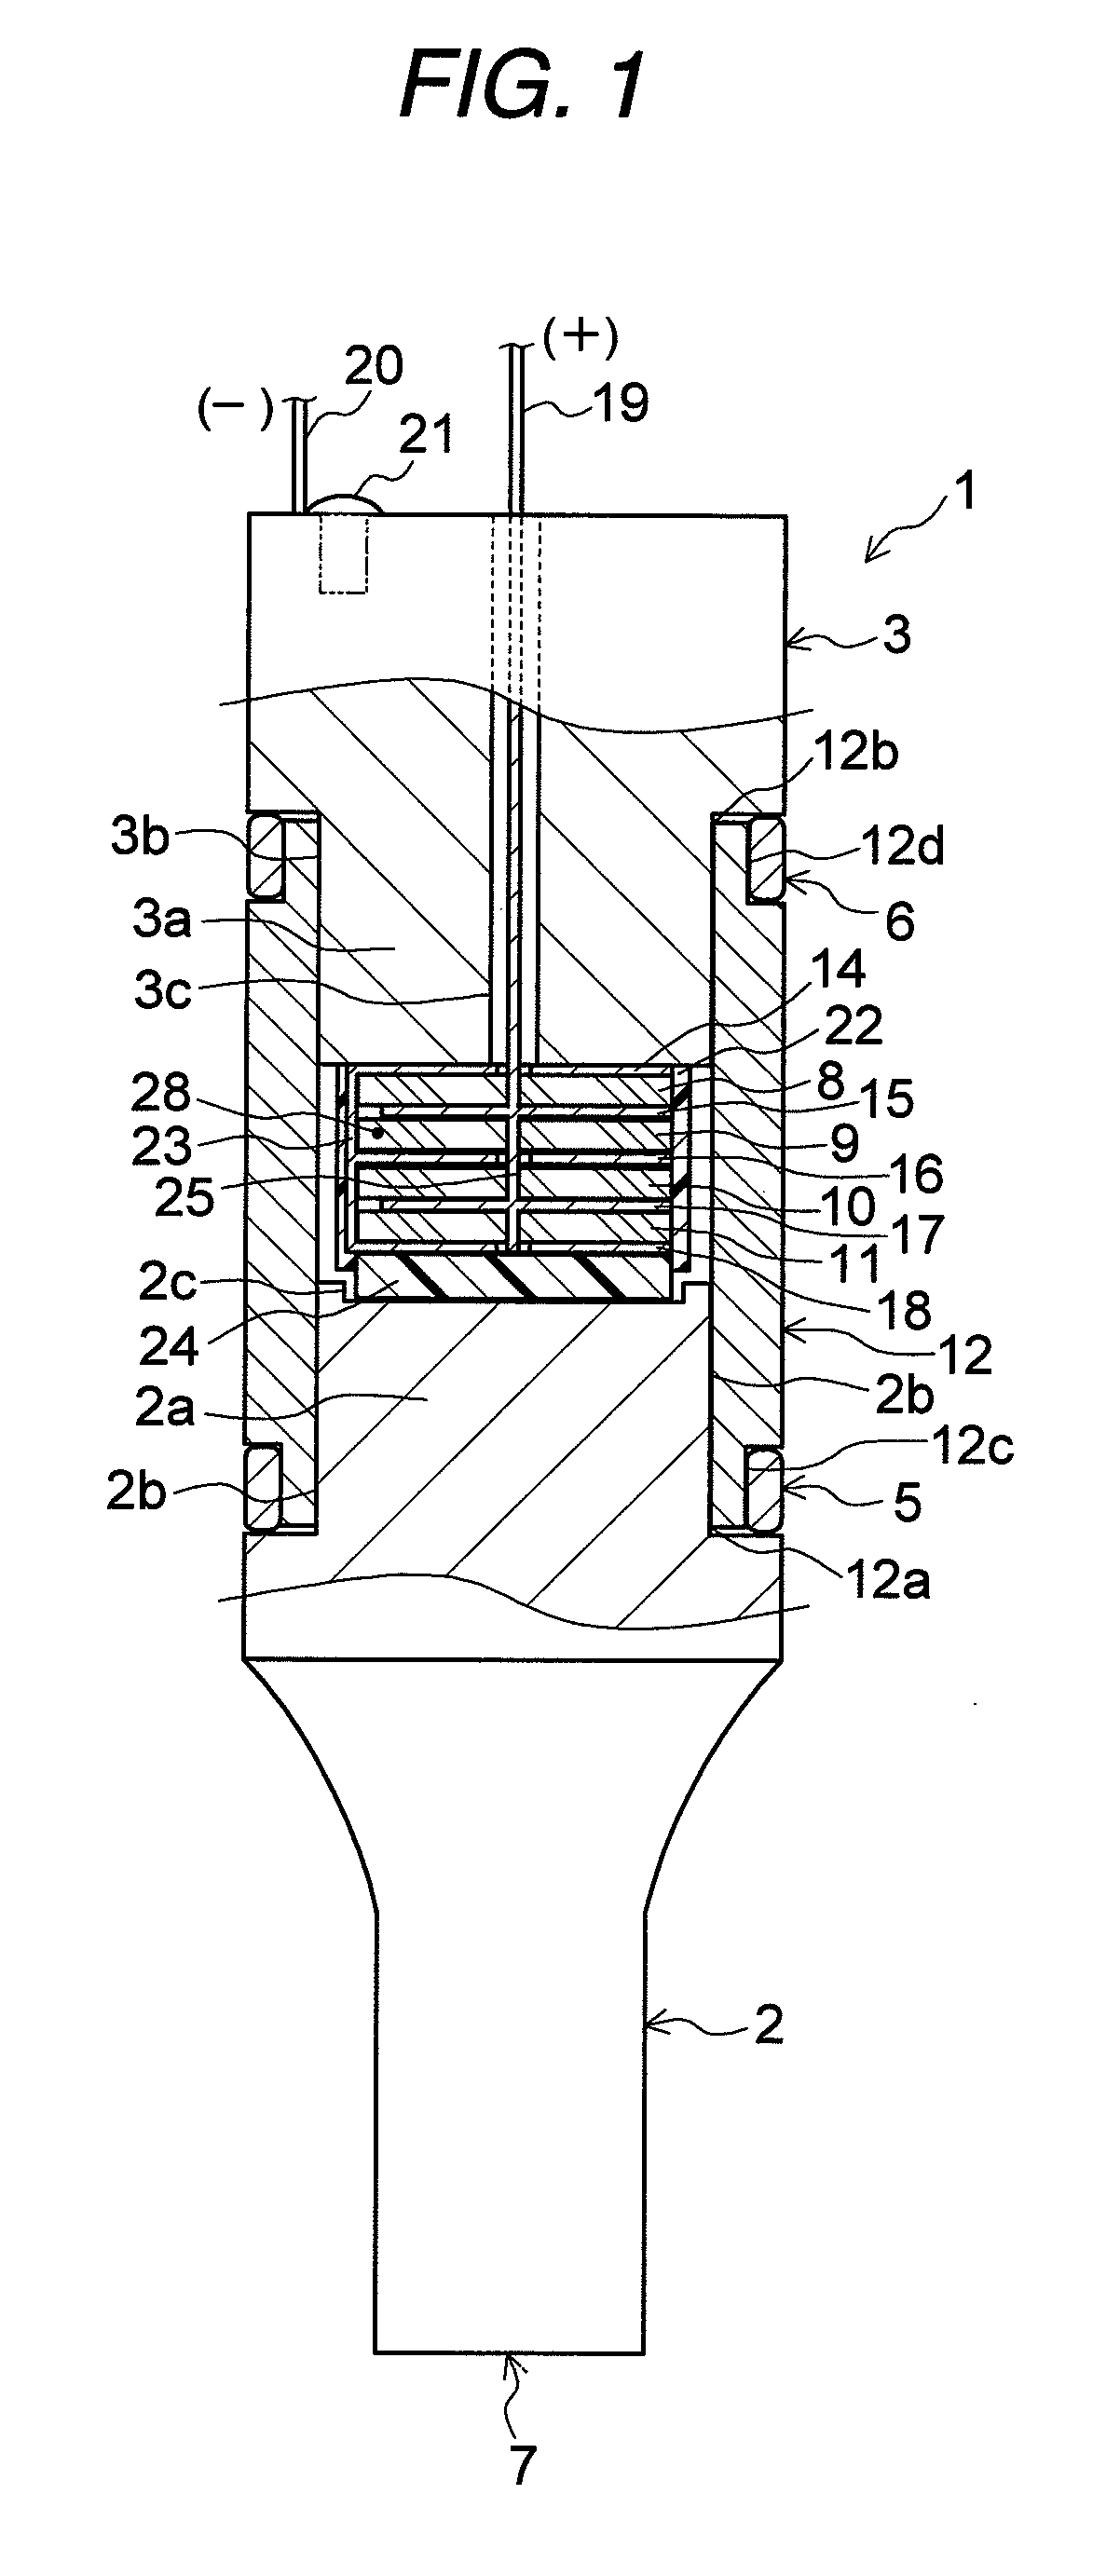 Ultrasonic transducer which is either crimped or welded during assembly